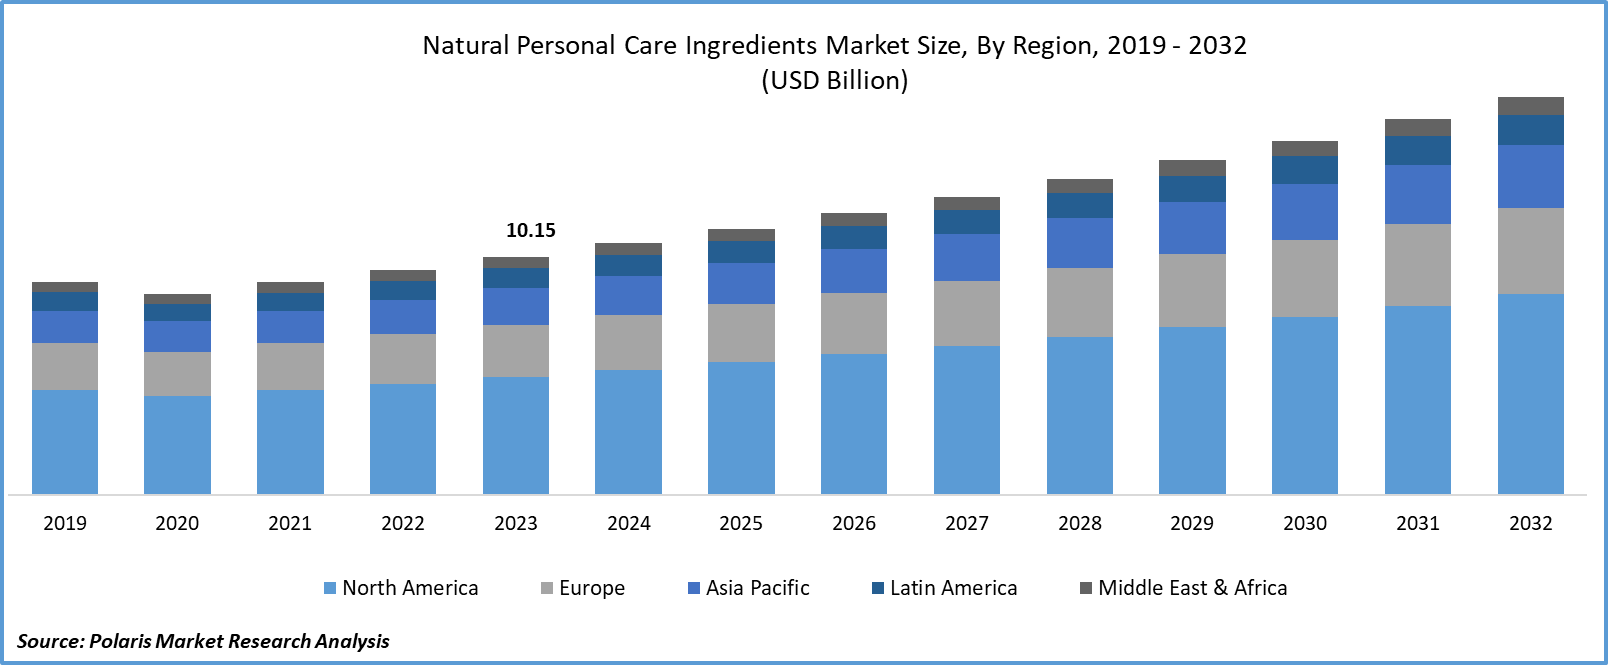 Natural Personal Care Ingredients Market Size